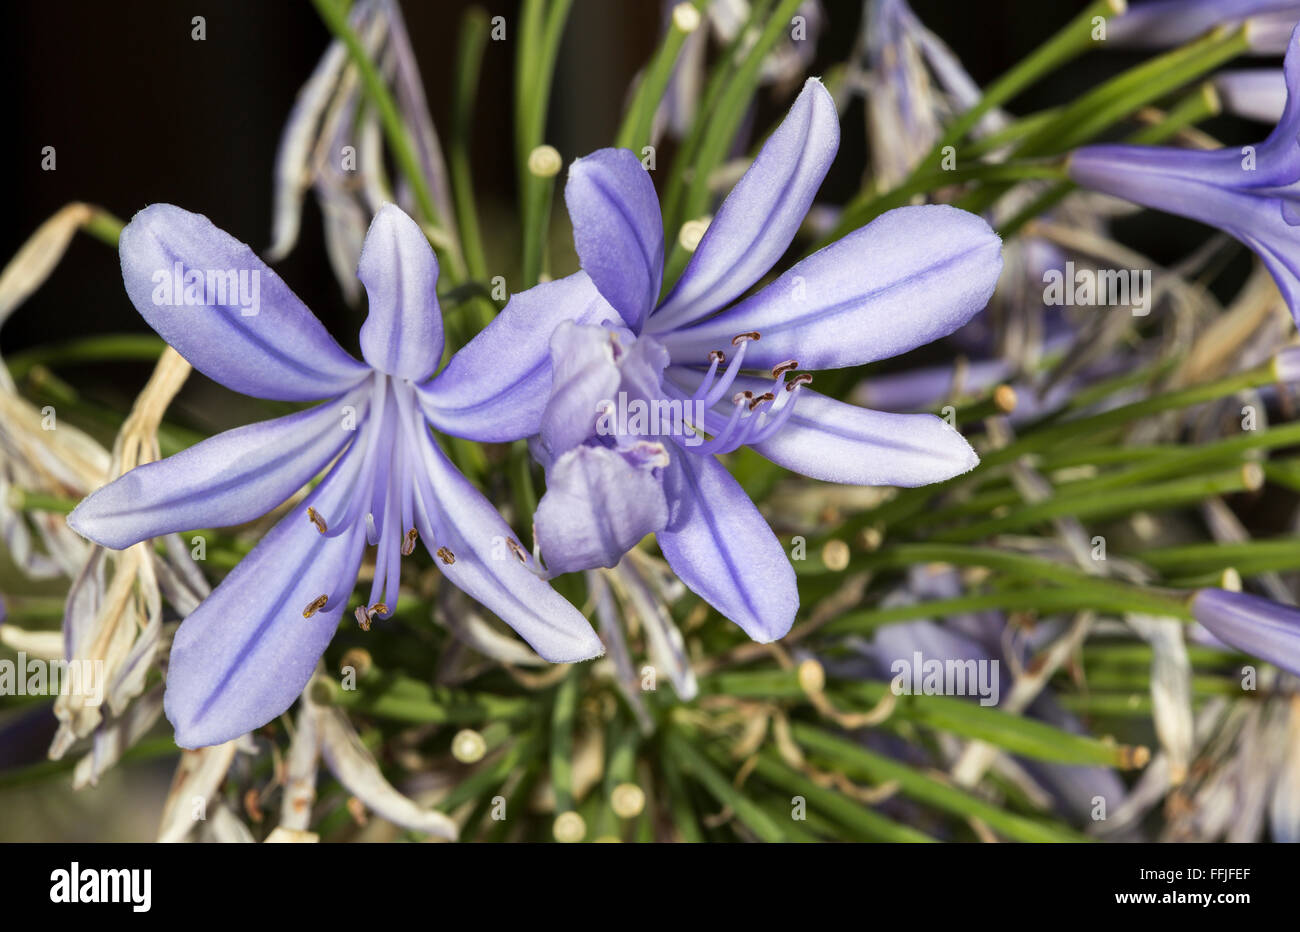 Flowers of Agapanthus, the name of this genus of flowering plants comes from the greek and means love flower. Some species of Ag Stock Photo